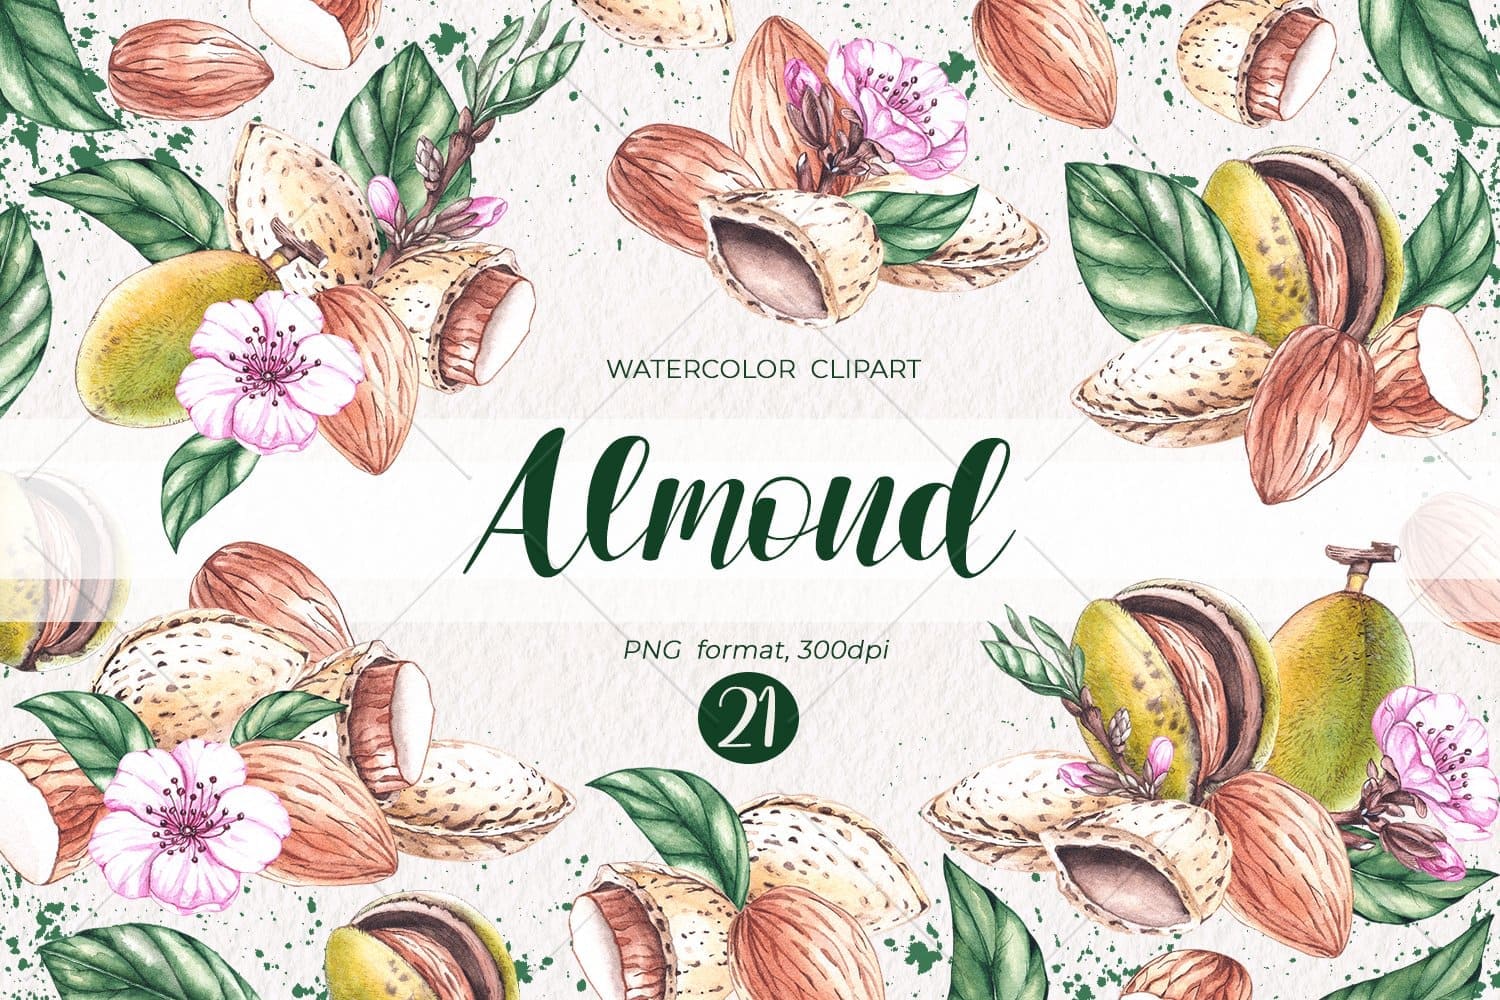 Title on picture: "Watercolor Clipart Almond, PNG format, 300dpi".